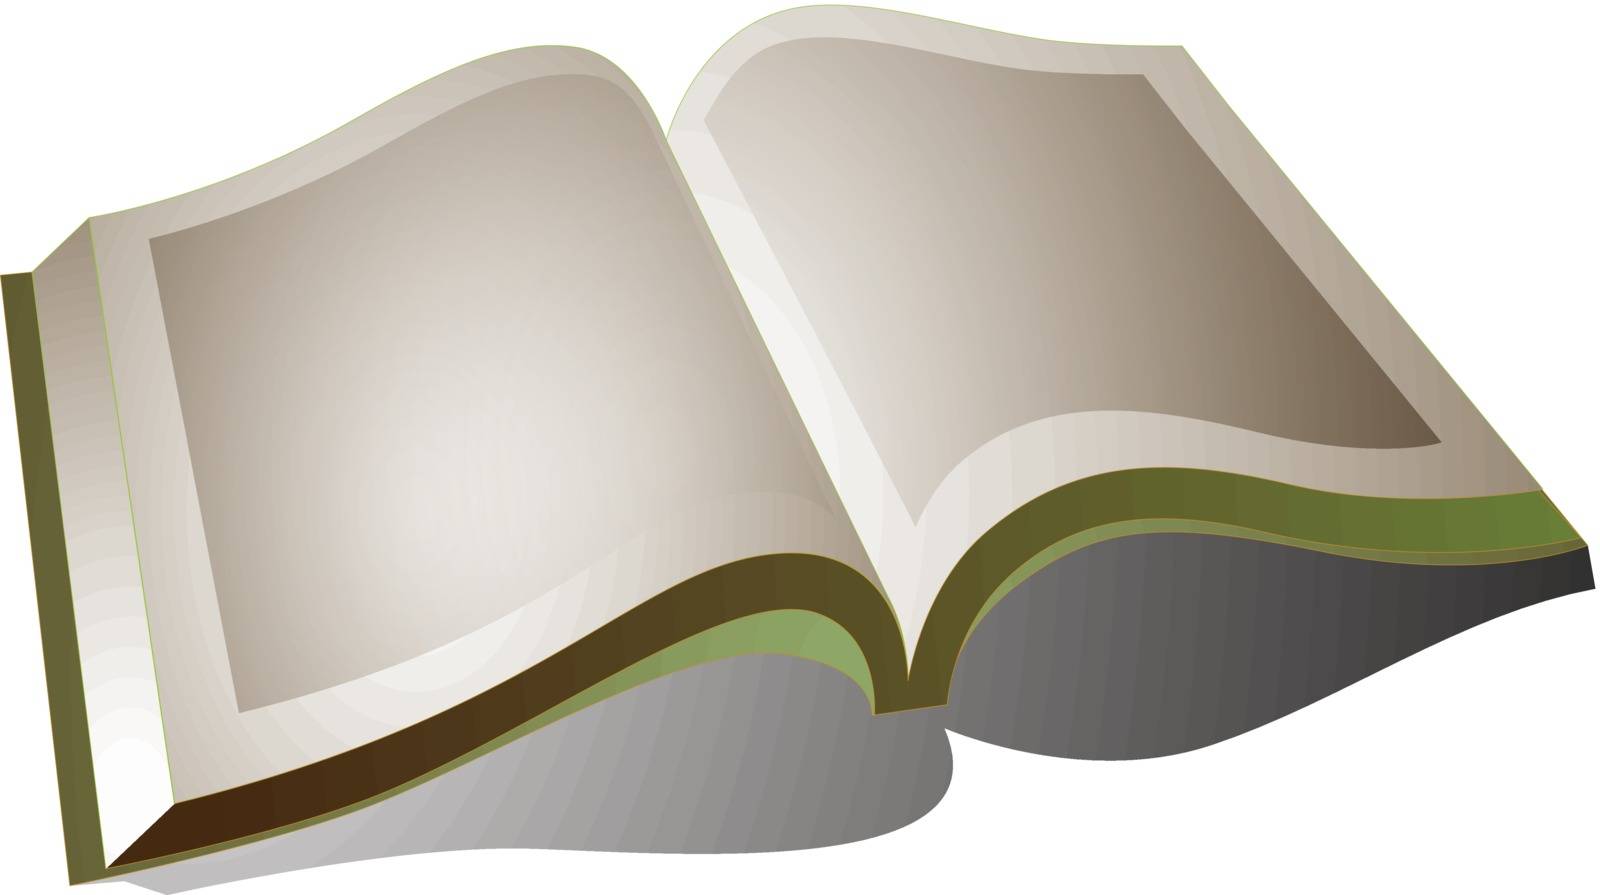 Open book with white pages. Illustration on white